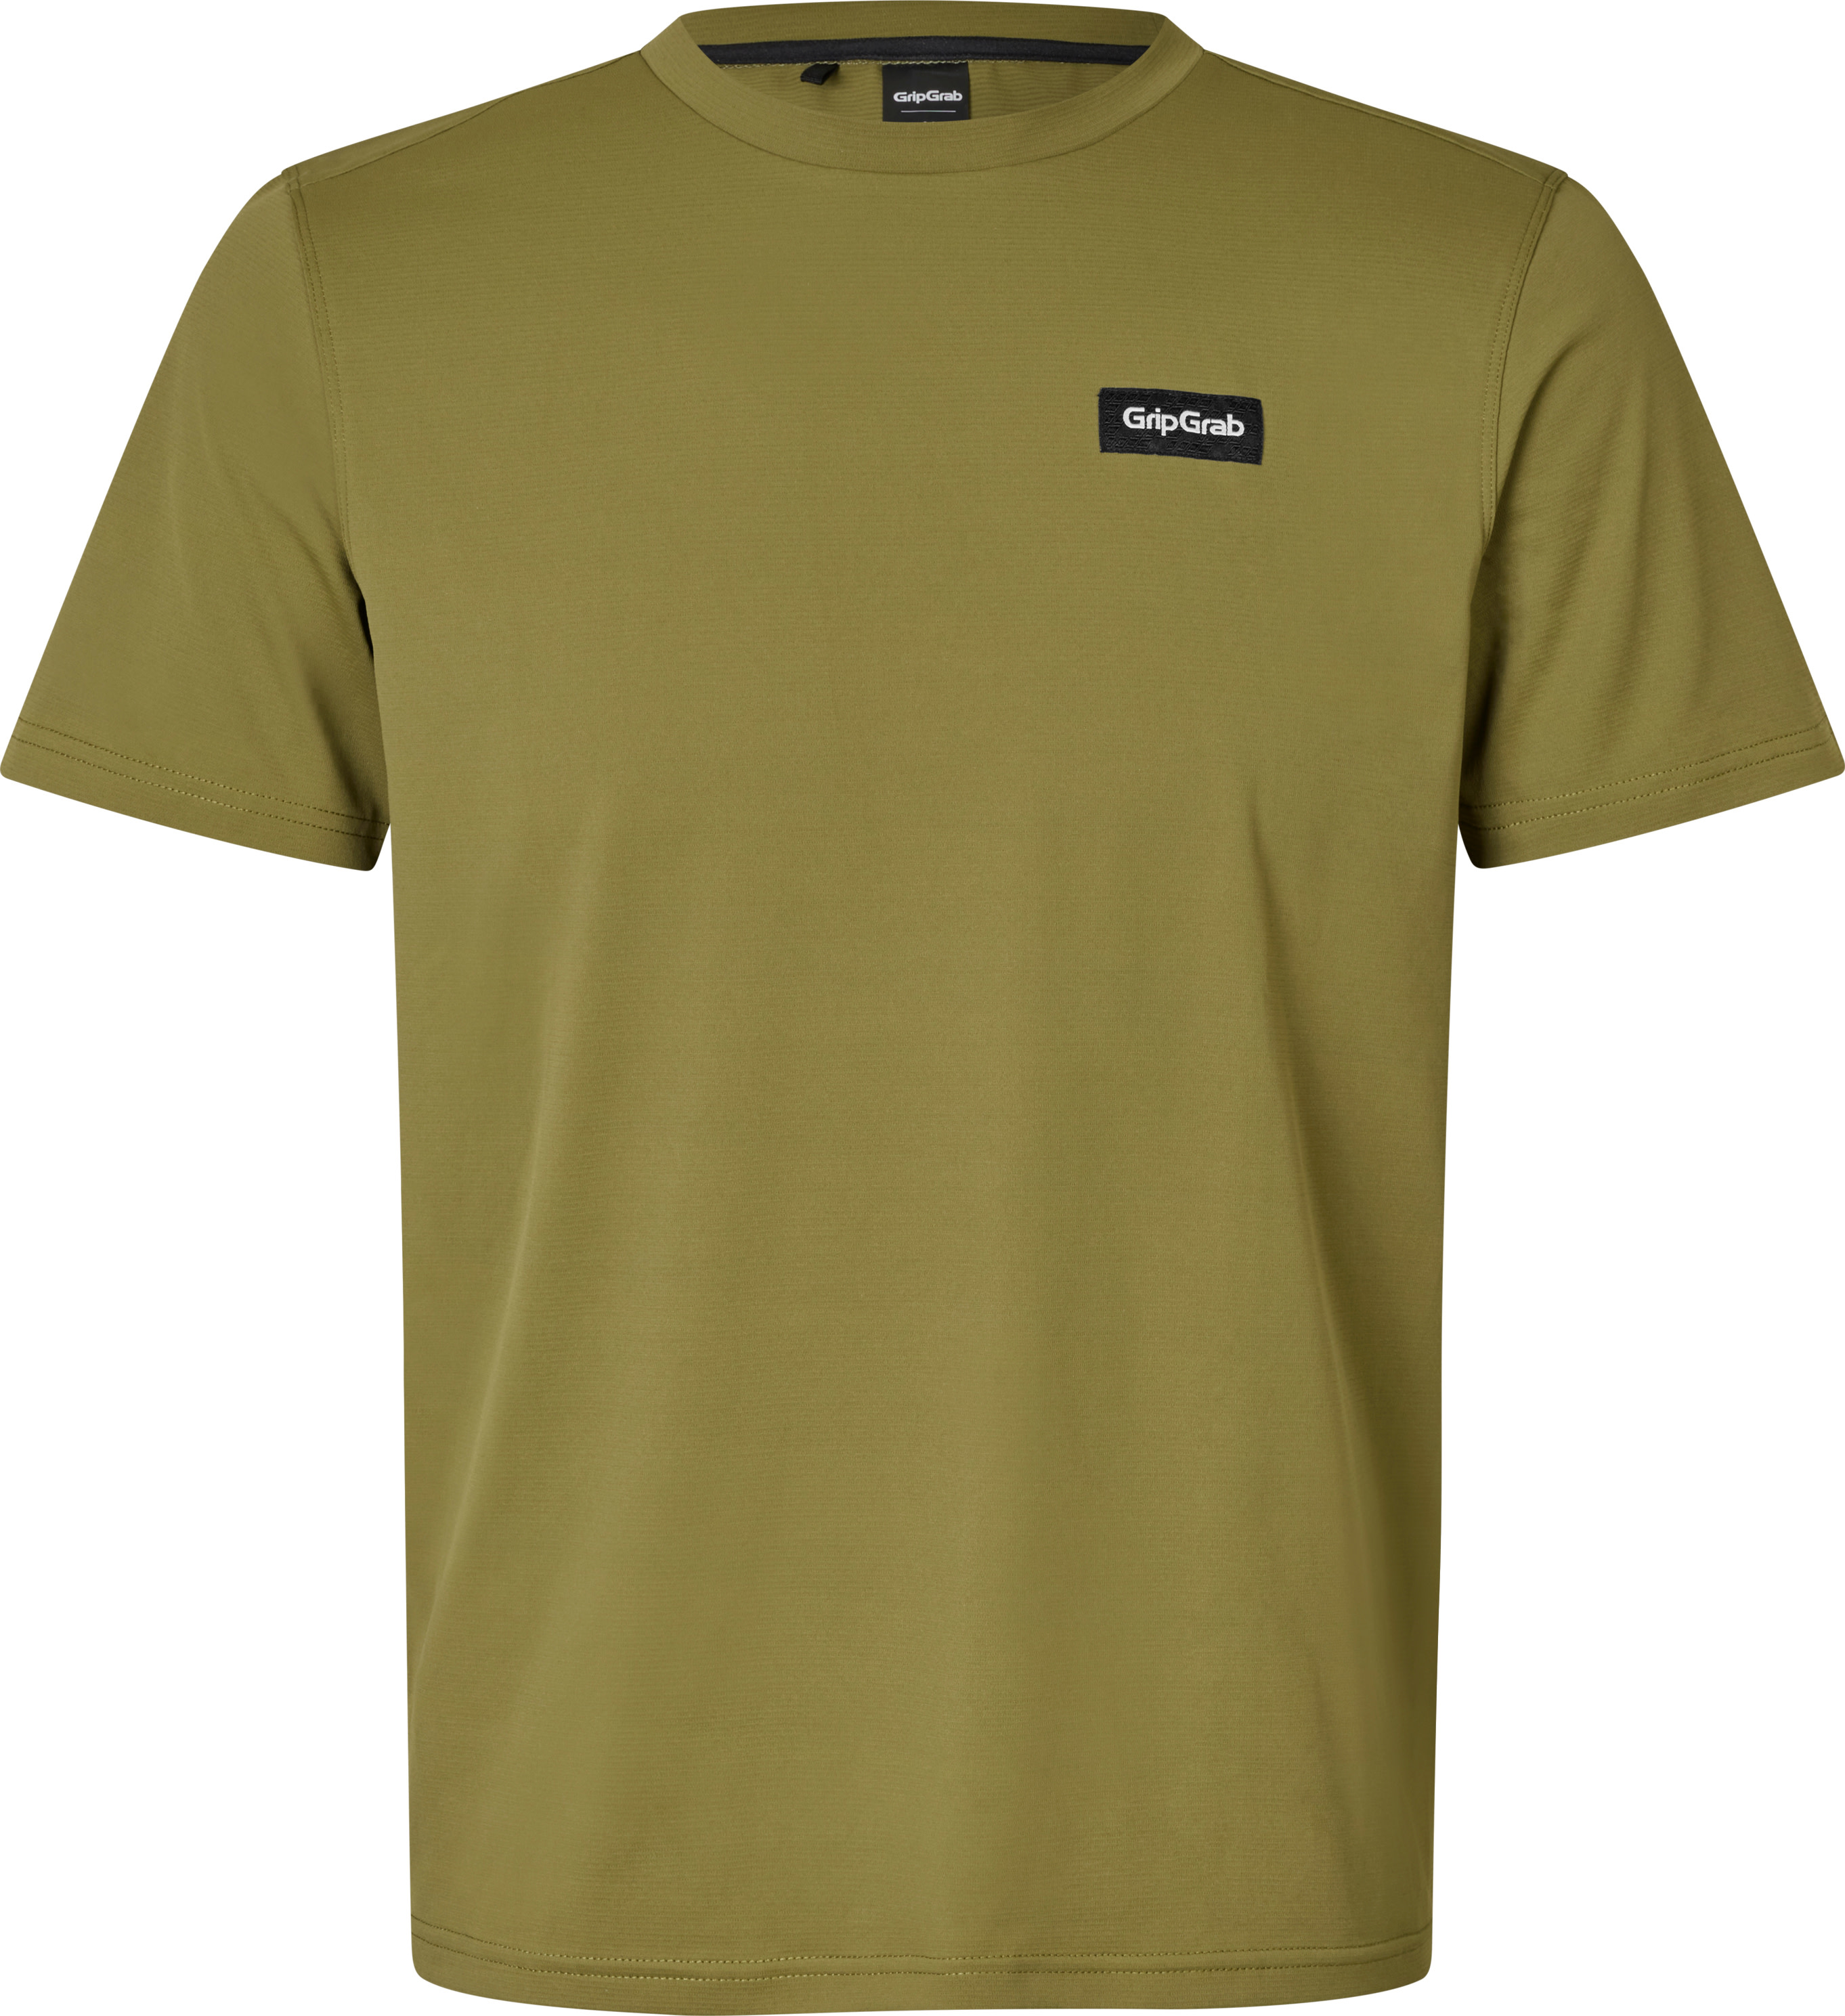 Gripgrab Men’s Flow Technical T-Shirt Olive Green